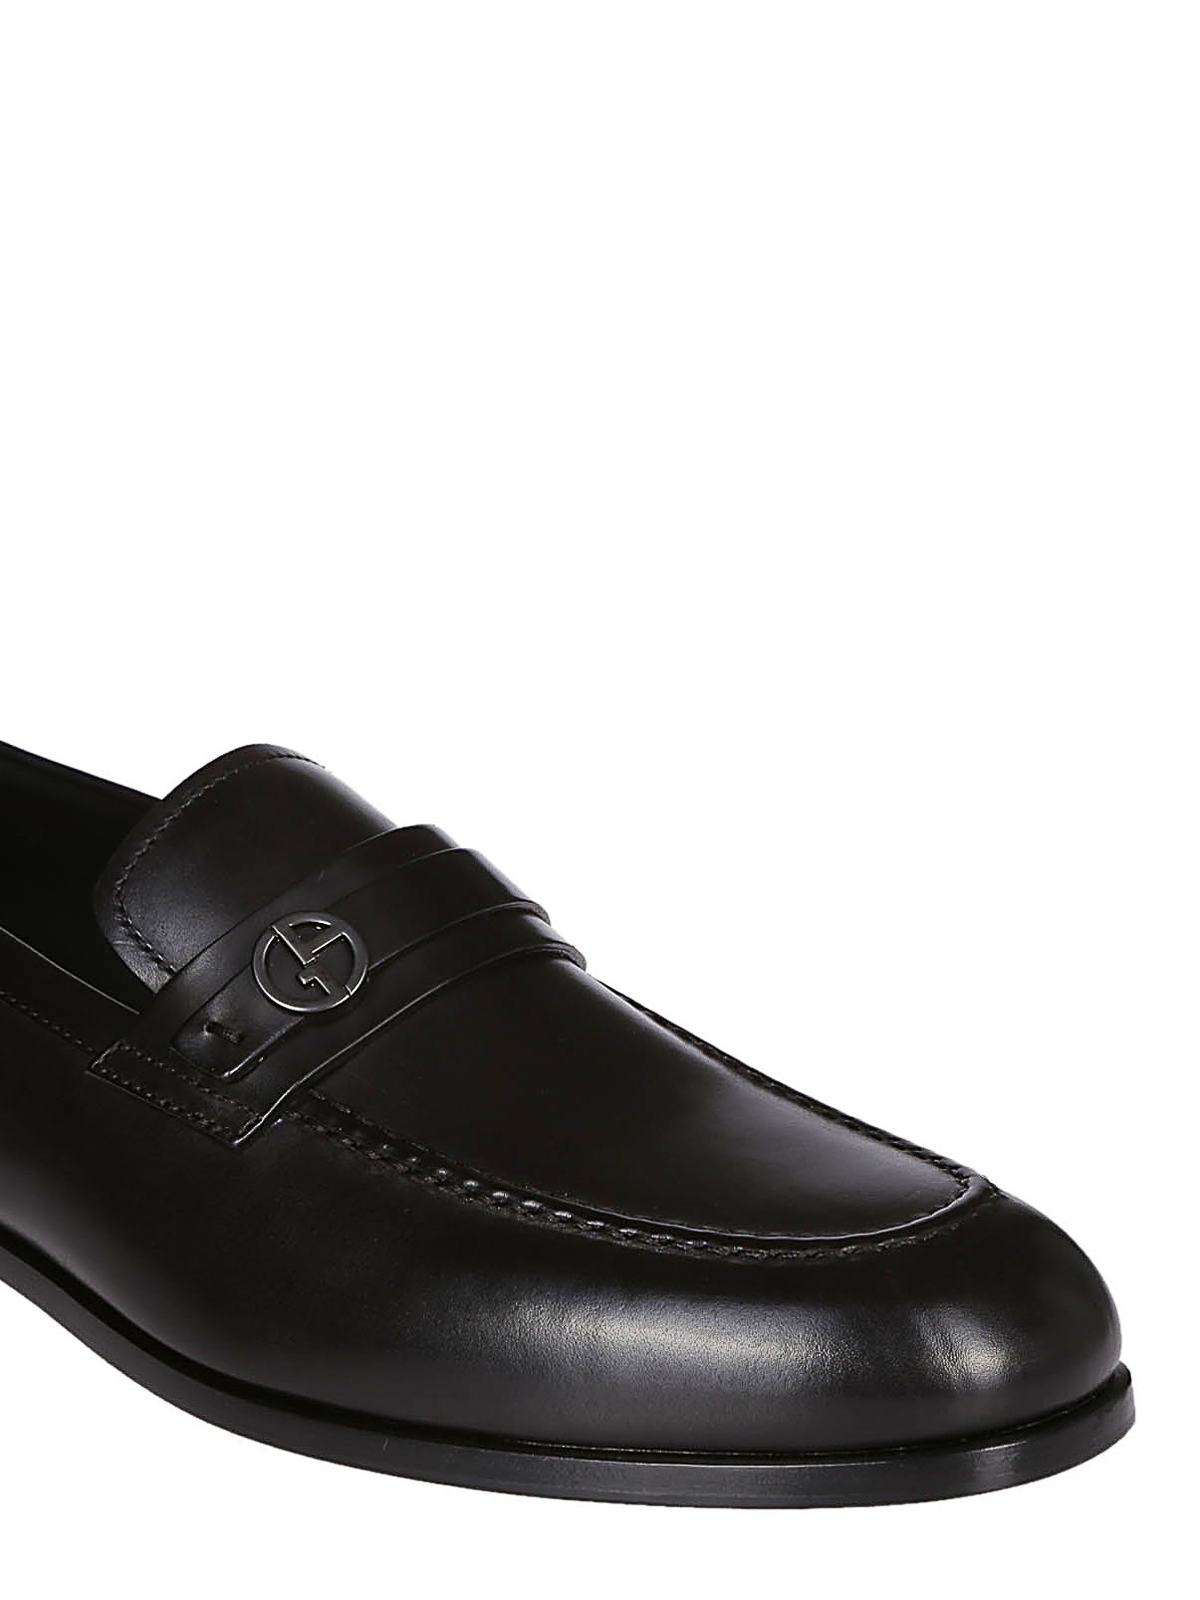 Afsnijden zonlicht Polijsten Loafers & Slippers Giorgio Armani - Smooth leather loafers -  X2A339XF31200002